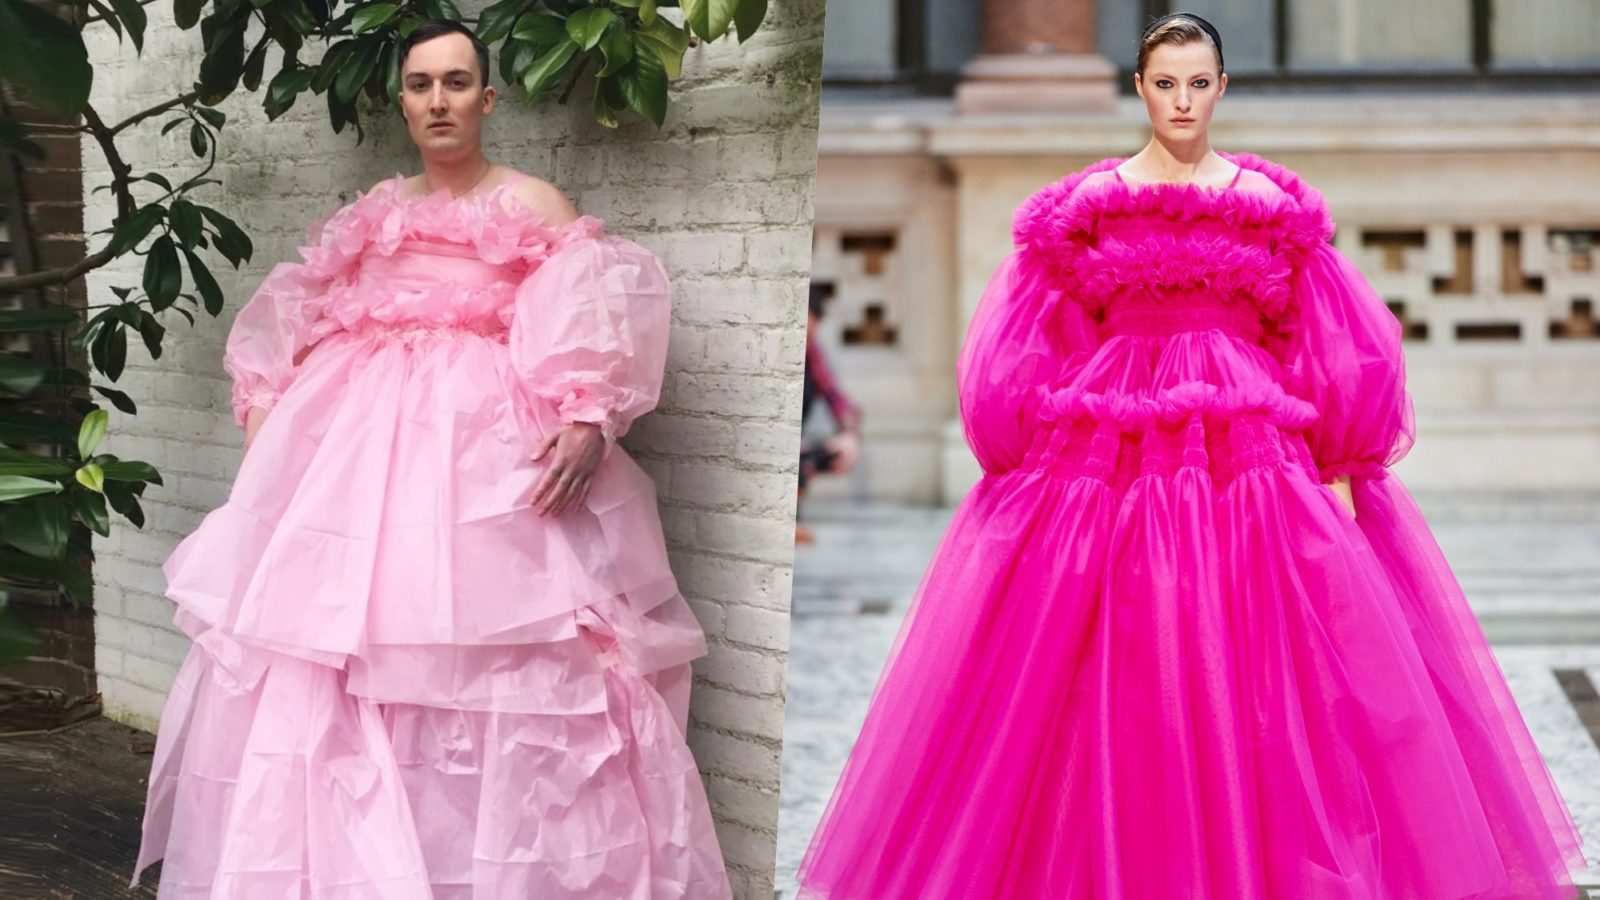 #HomeCouture: The Trend Recreating The Craziest Couture Looks Quarantine Style